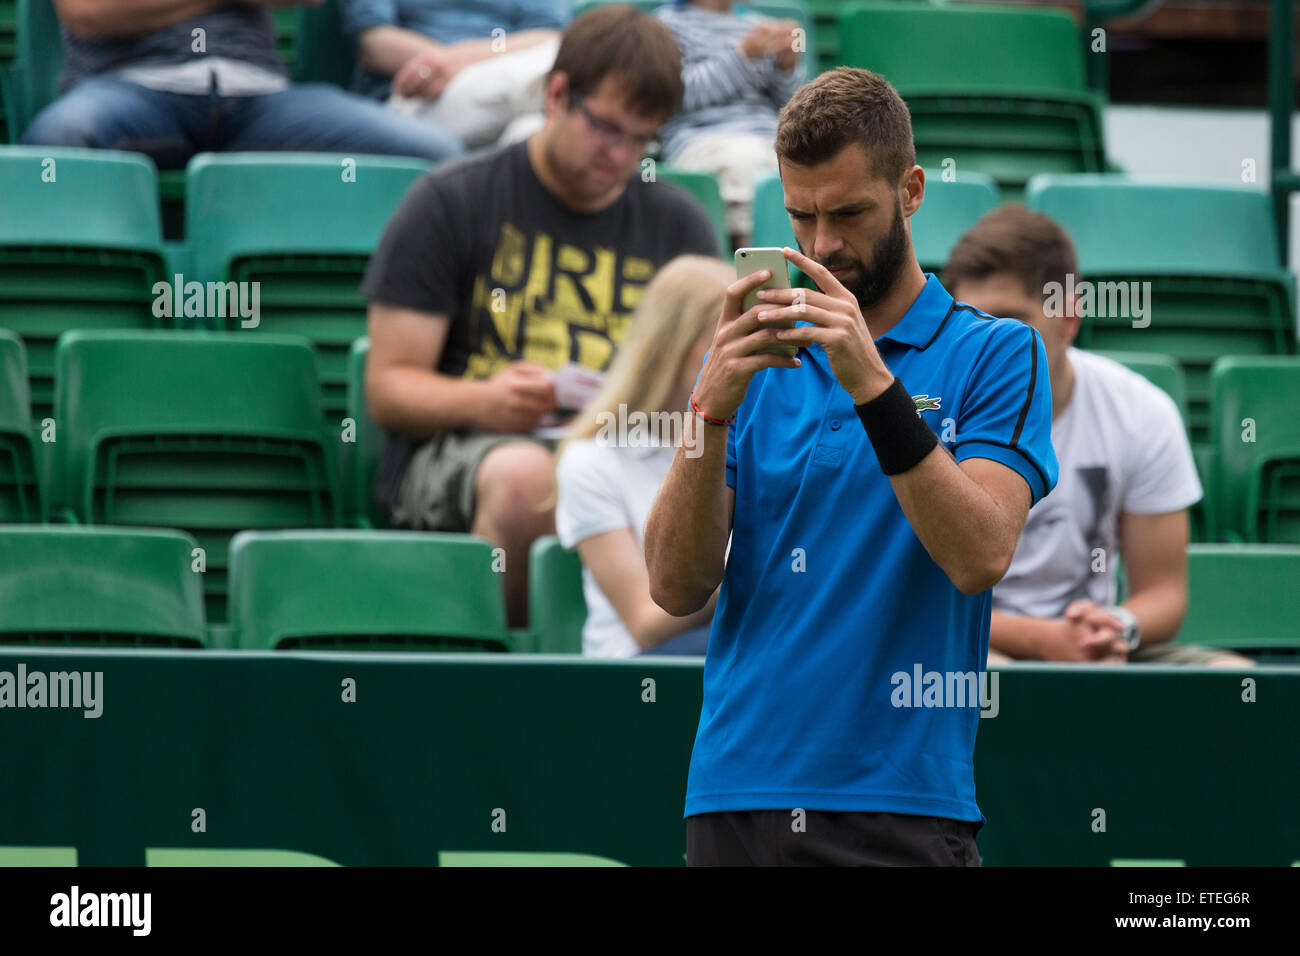 French tennis player Benoit Paire takes a selfie before his match in the qualifying rounds of the ATP Gerry Weber Open Tennis Championships at Halle, Germany. Stock Photo